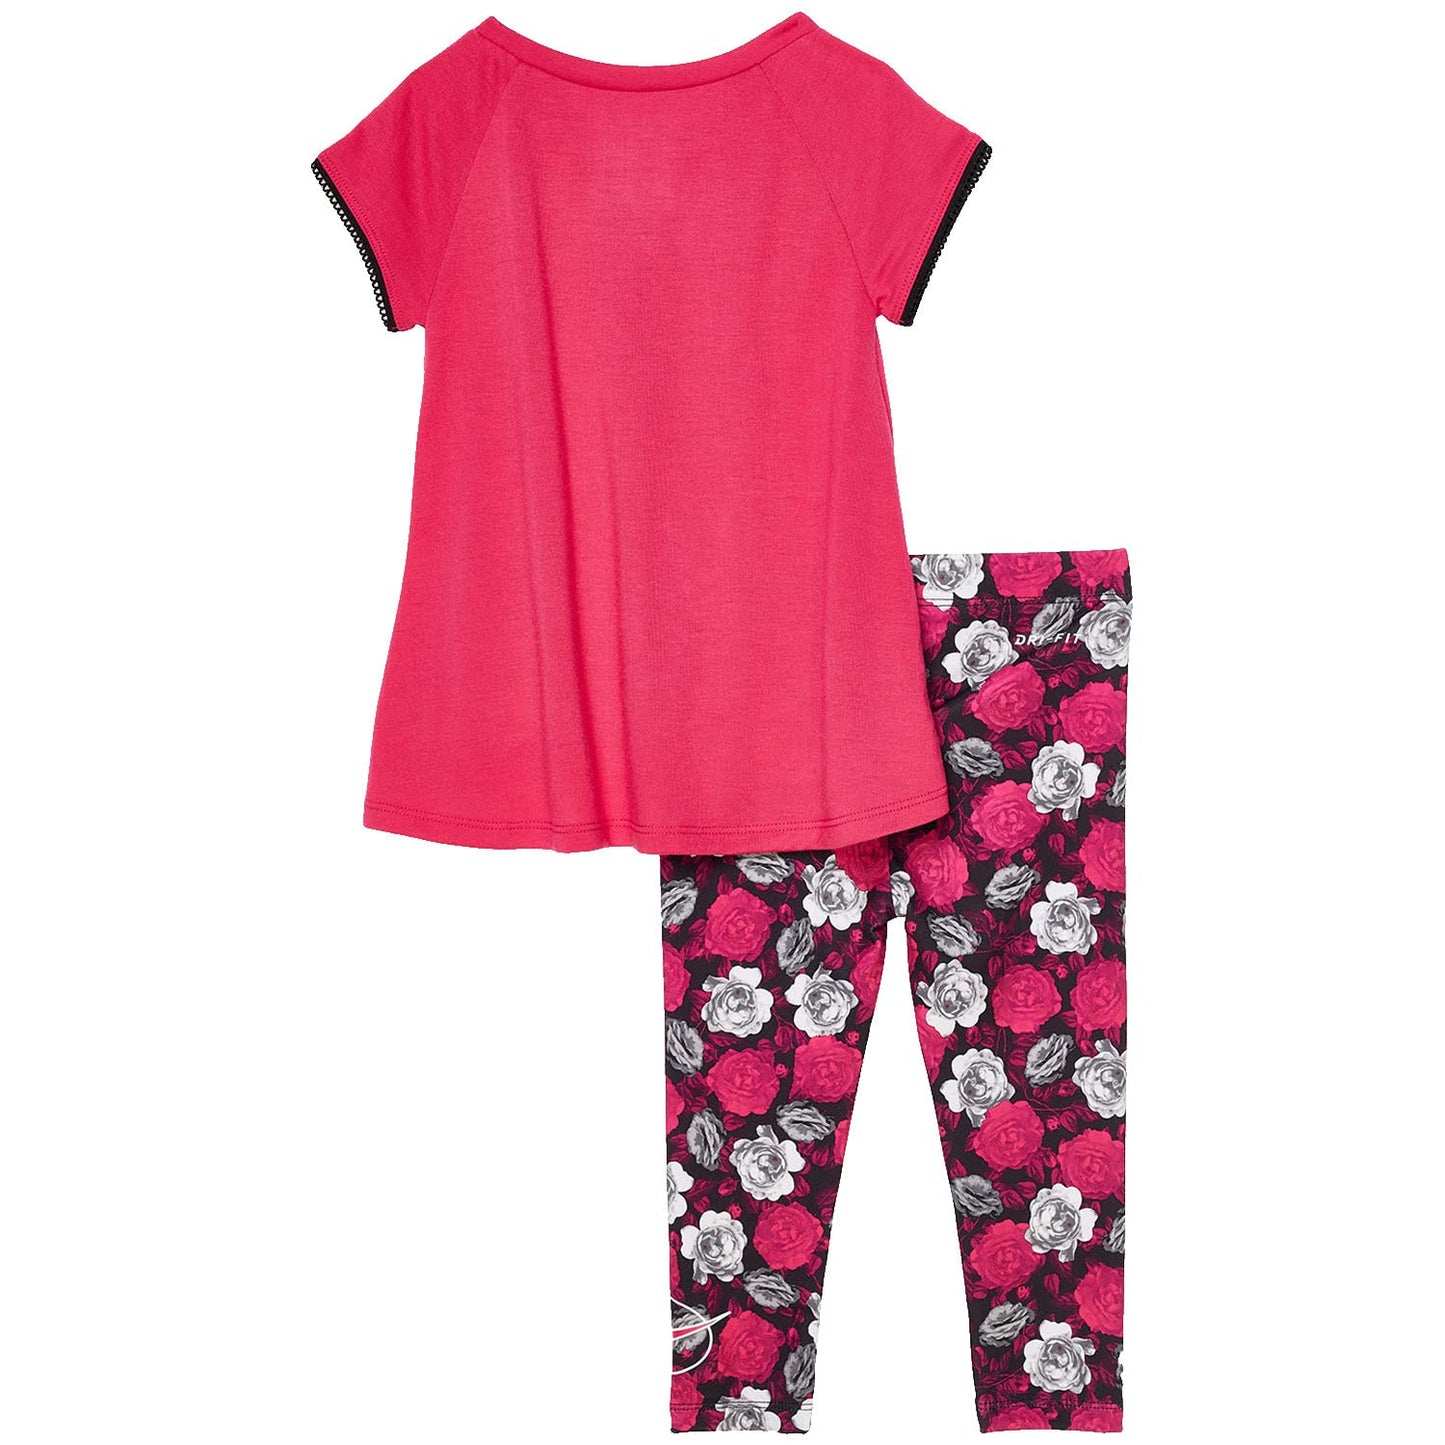 Image 2 of Printed Tunic and Leggings Set (Infant)